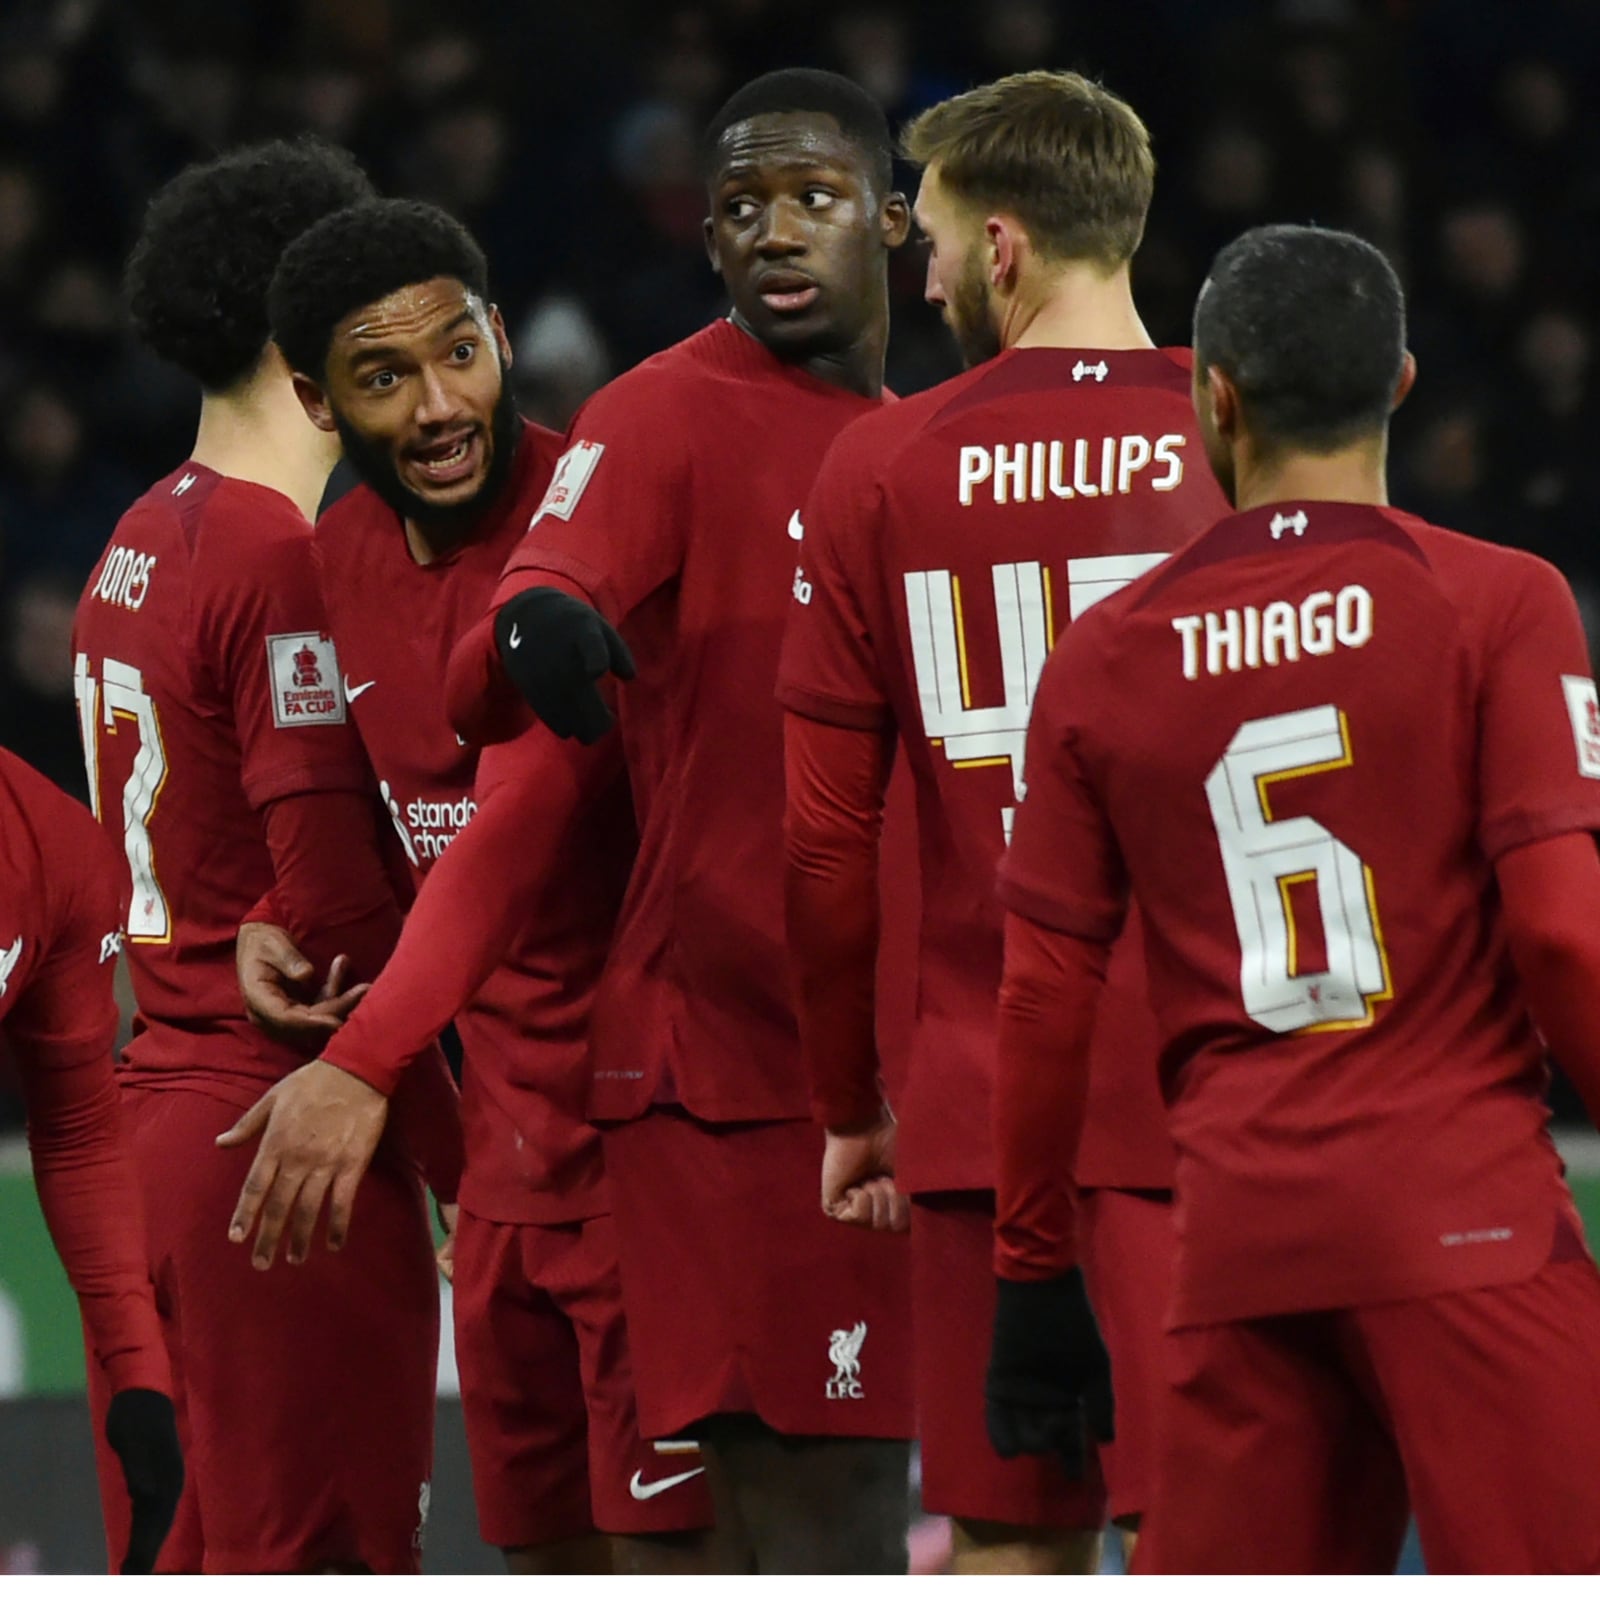 Liverpool vs Brighton and Hove Albion FA Cup Live Streaming When and Where to Watch Liverpool vs Brighton and Hove Albion Live Online and on TV